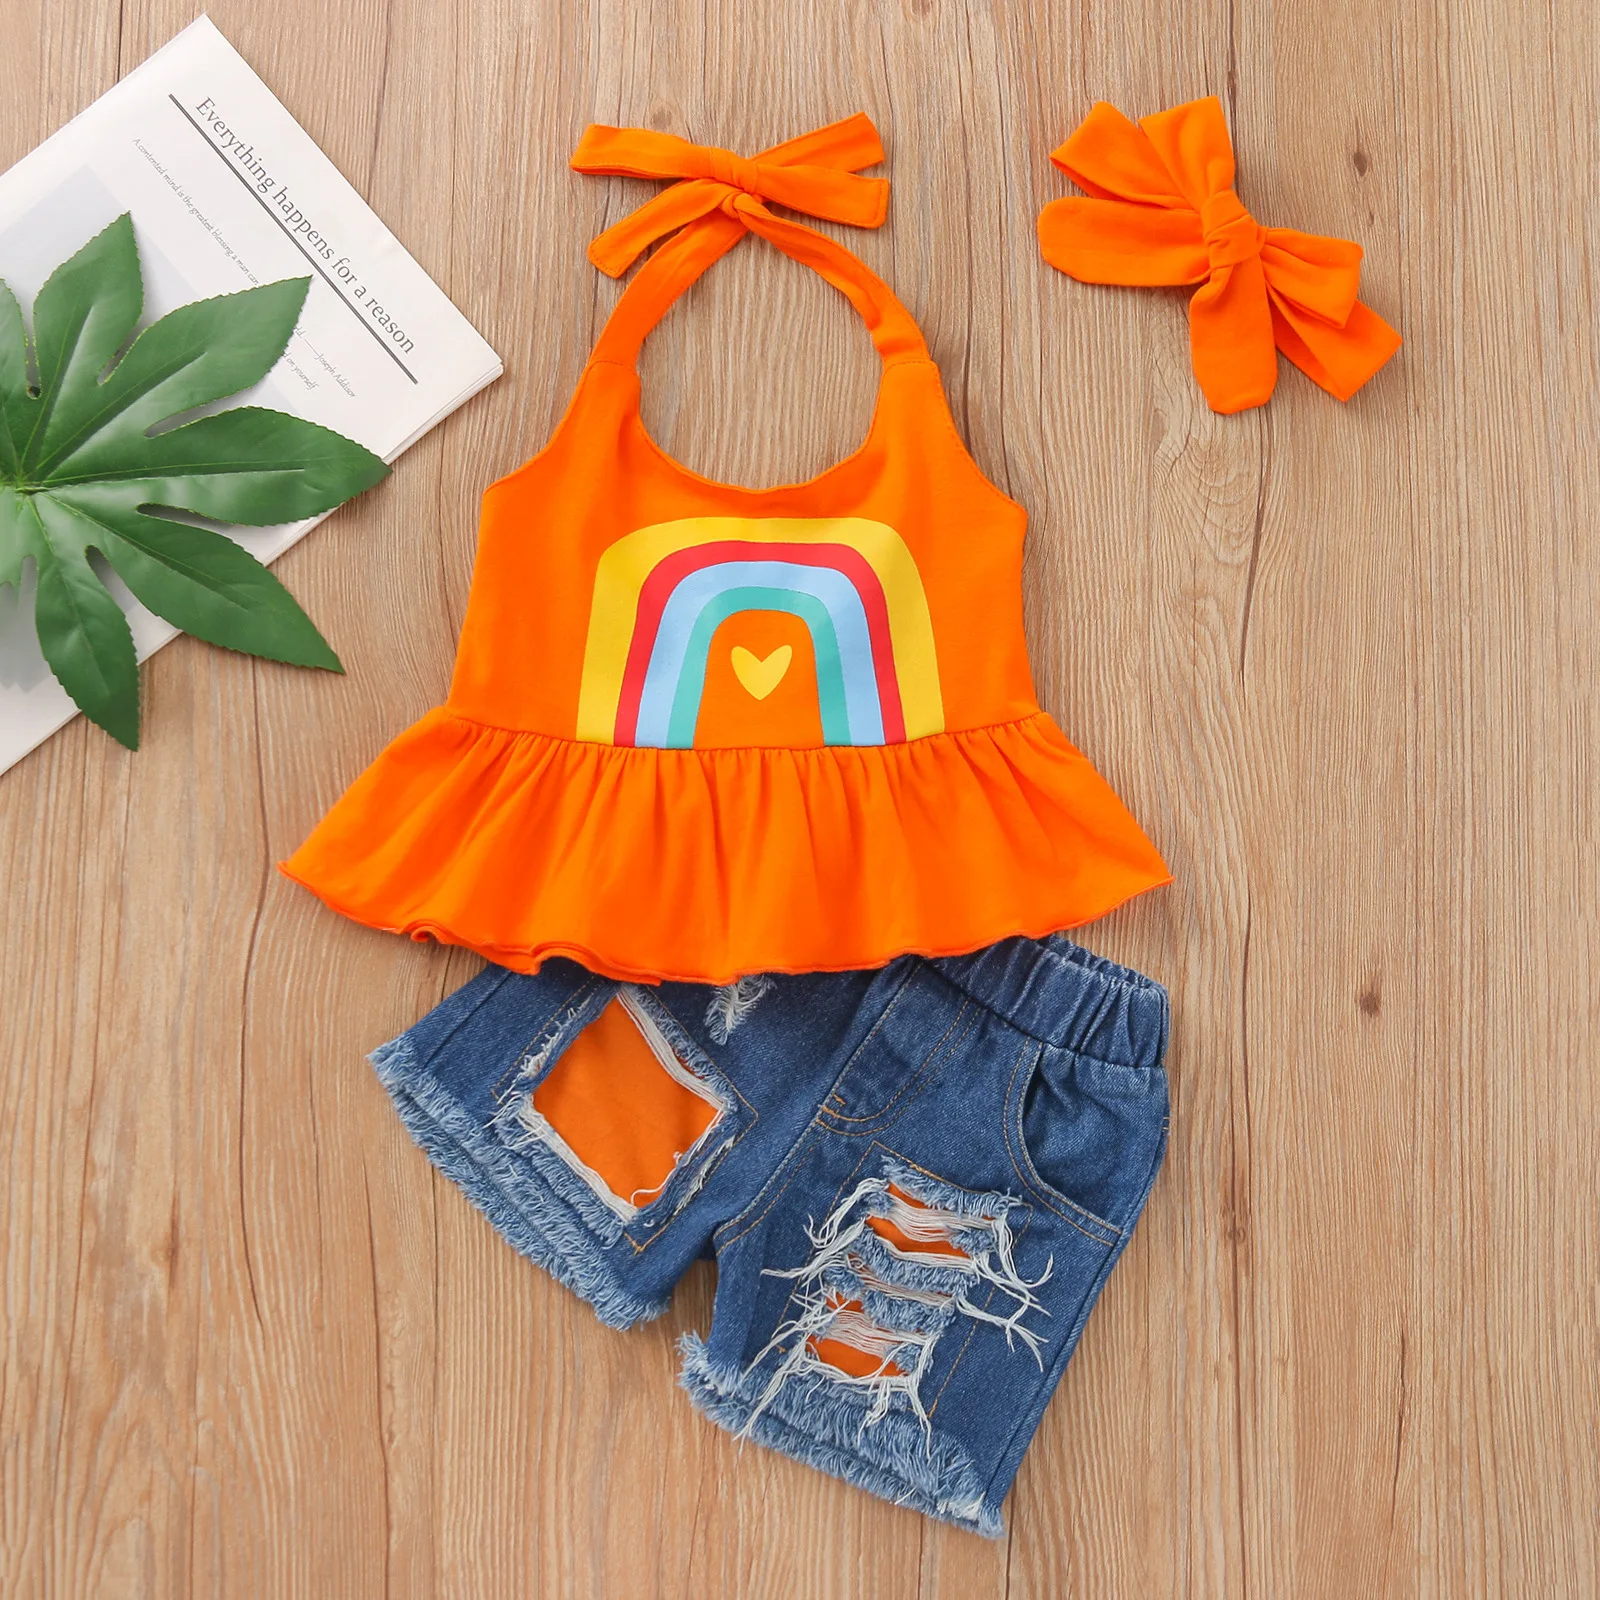 

Custom Summer Off Shoulder Top Ripped Holes Denim Shorts Children Toddler Outfits Ruffle Pant Kids Baby Girls Clothing Sets, Picture shows